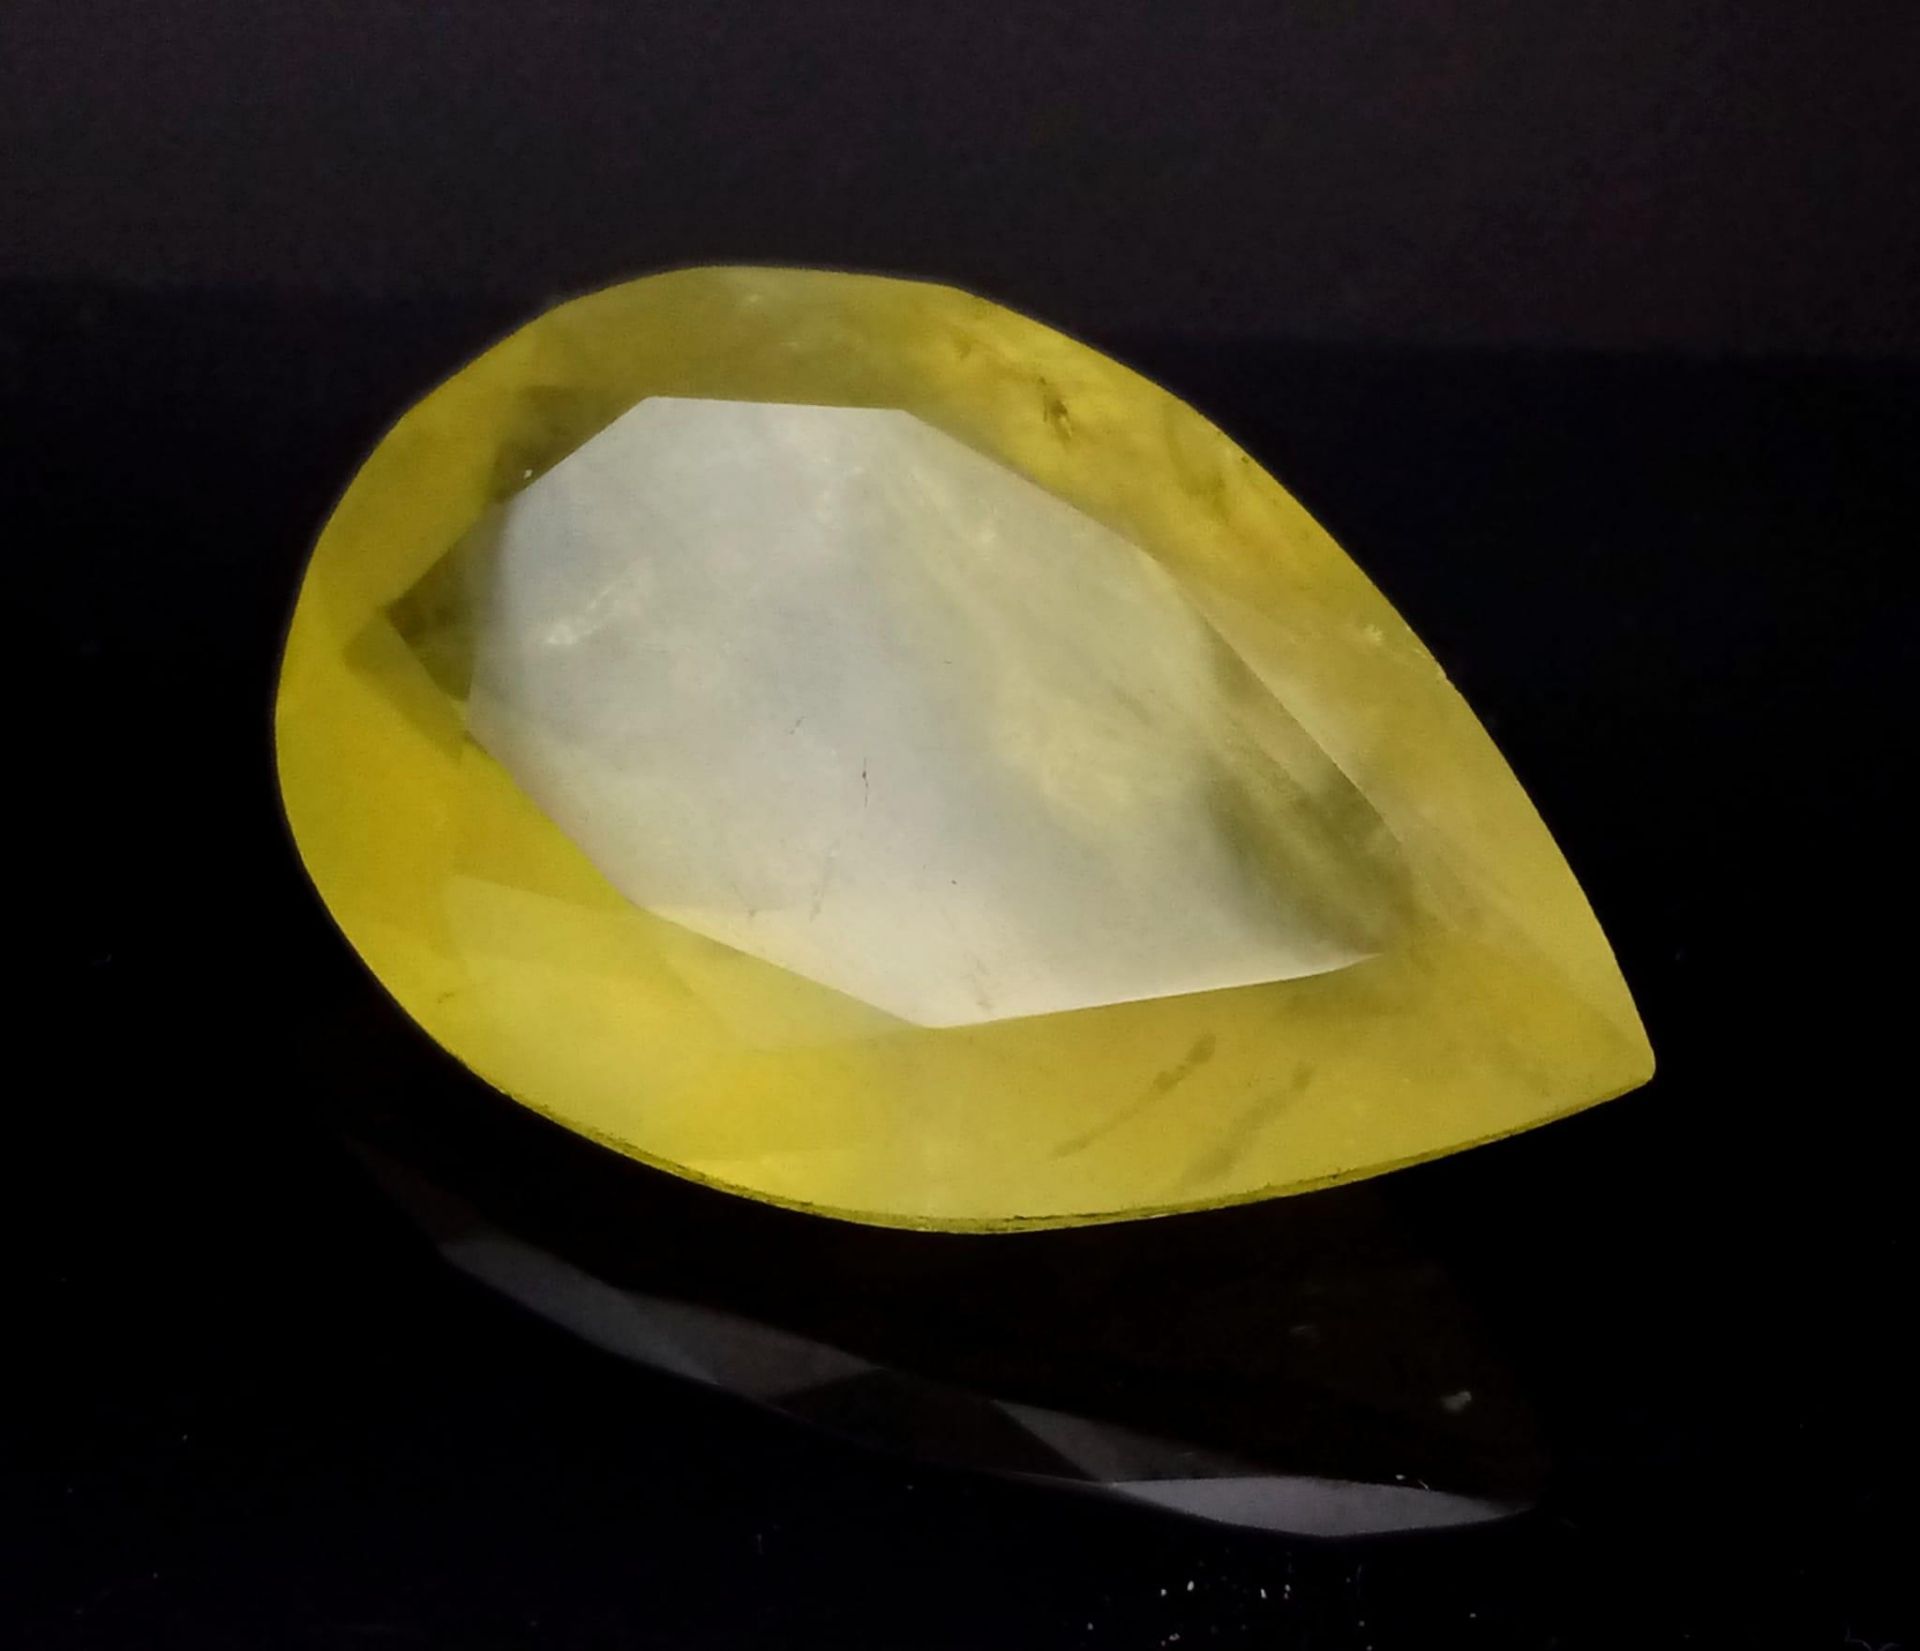 A 41.65ct Faceted Heliodor Yellow Aquamarine Pear-Shaped Gemstone. Comes with a GLI Certificate.